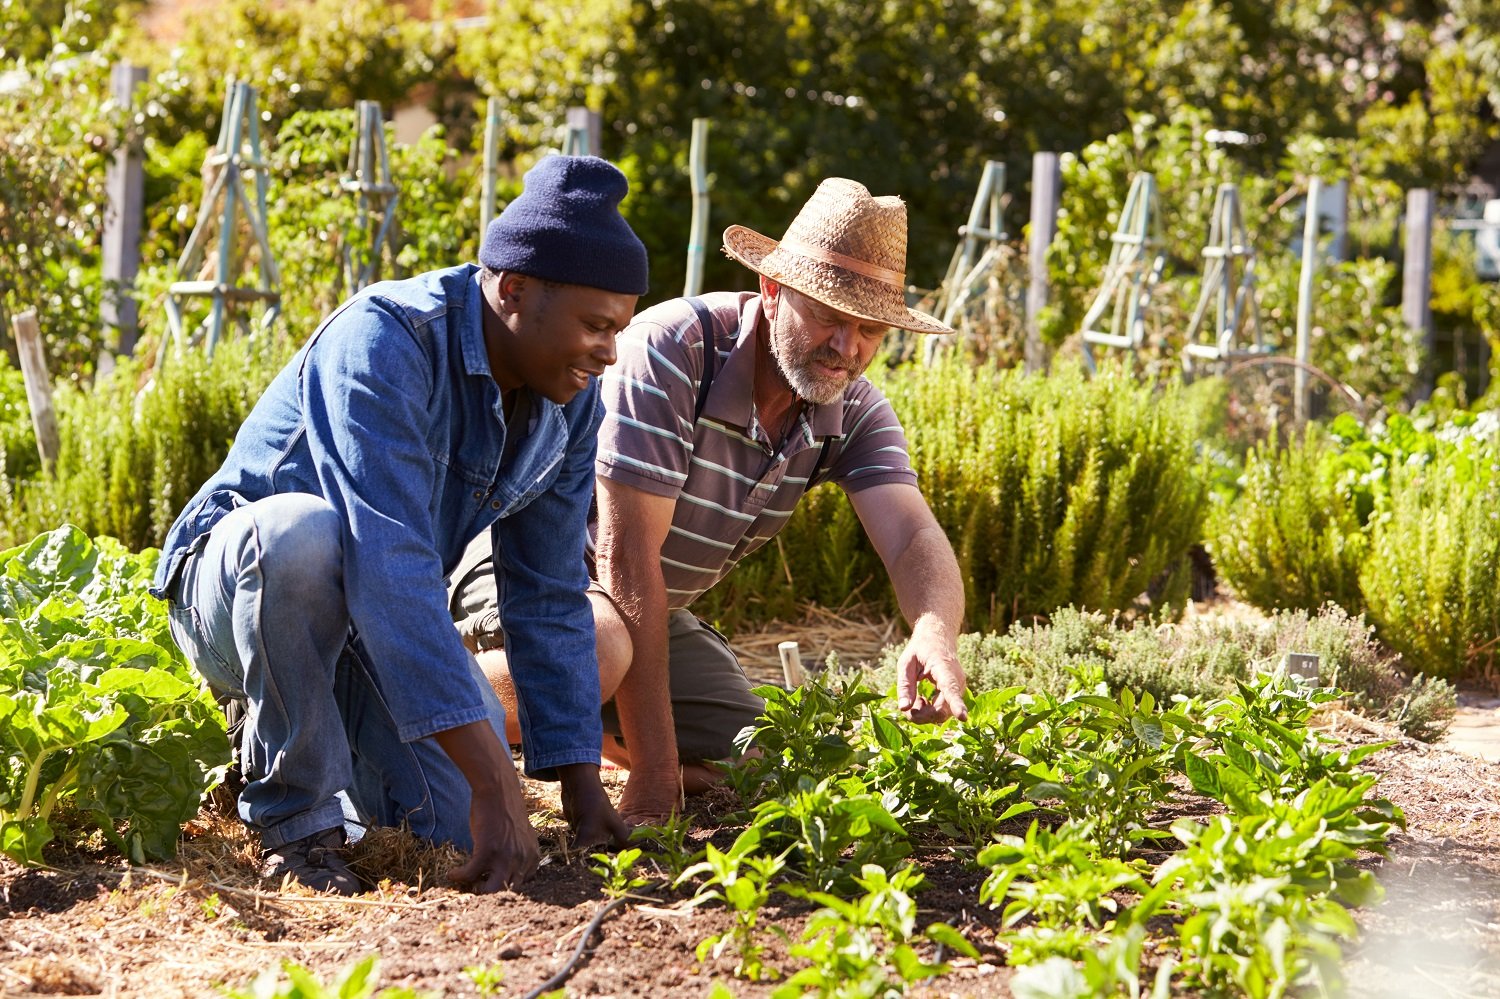 Community gardens can help people connect and cope urban loneliness.